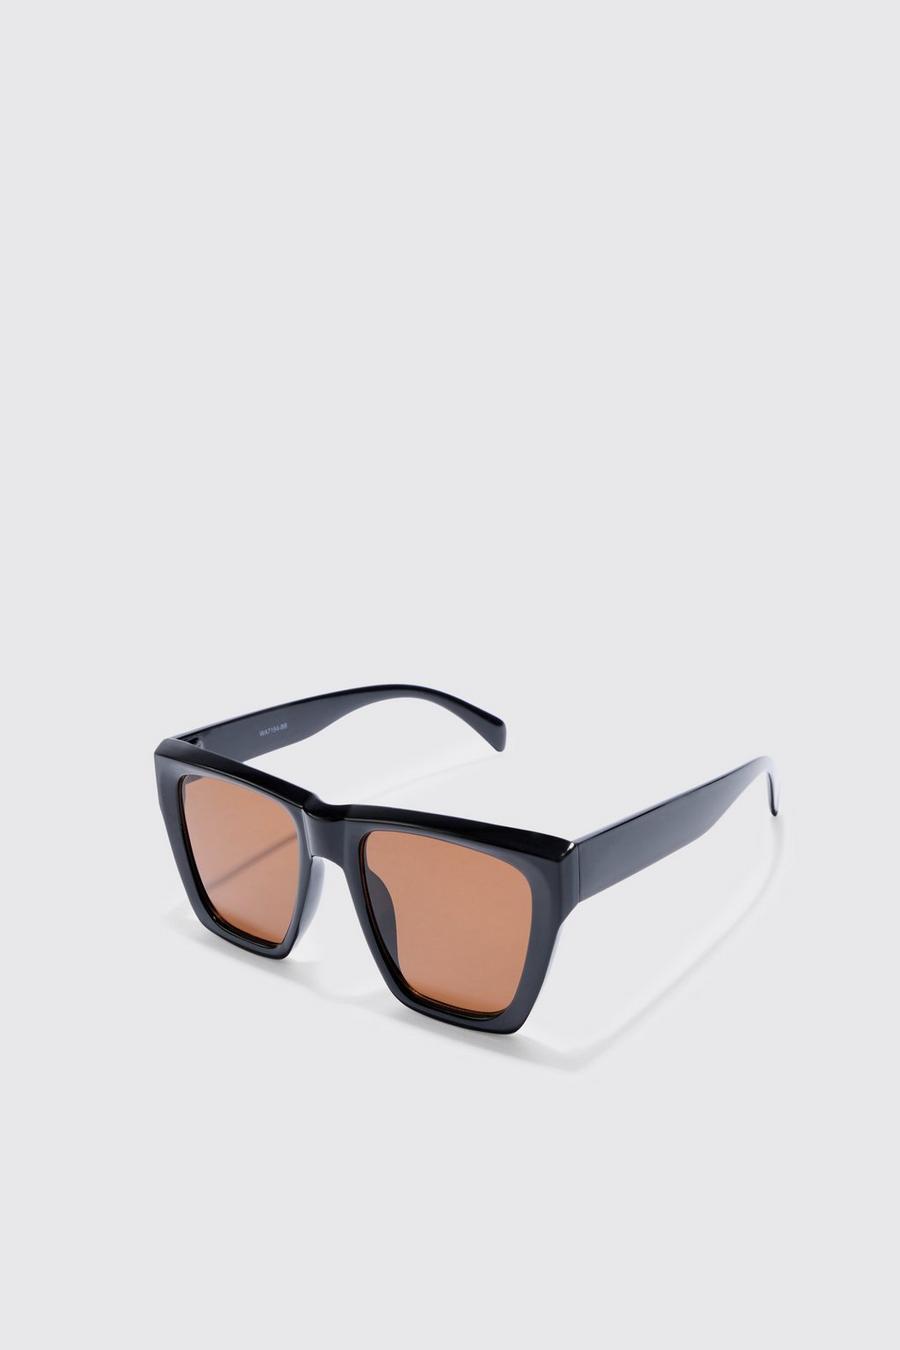 Square Sunglasses With Brown Lens In Black